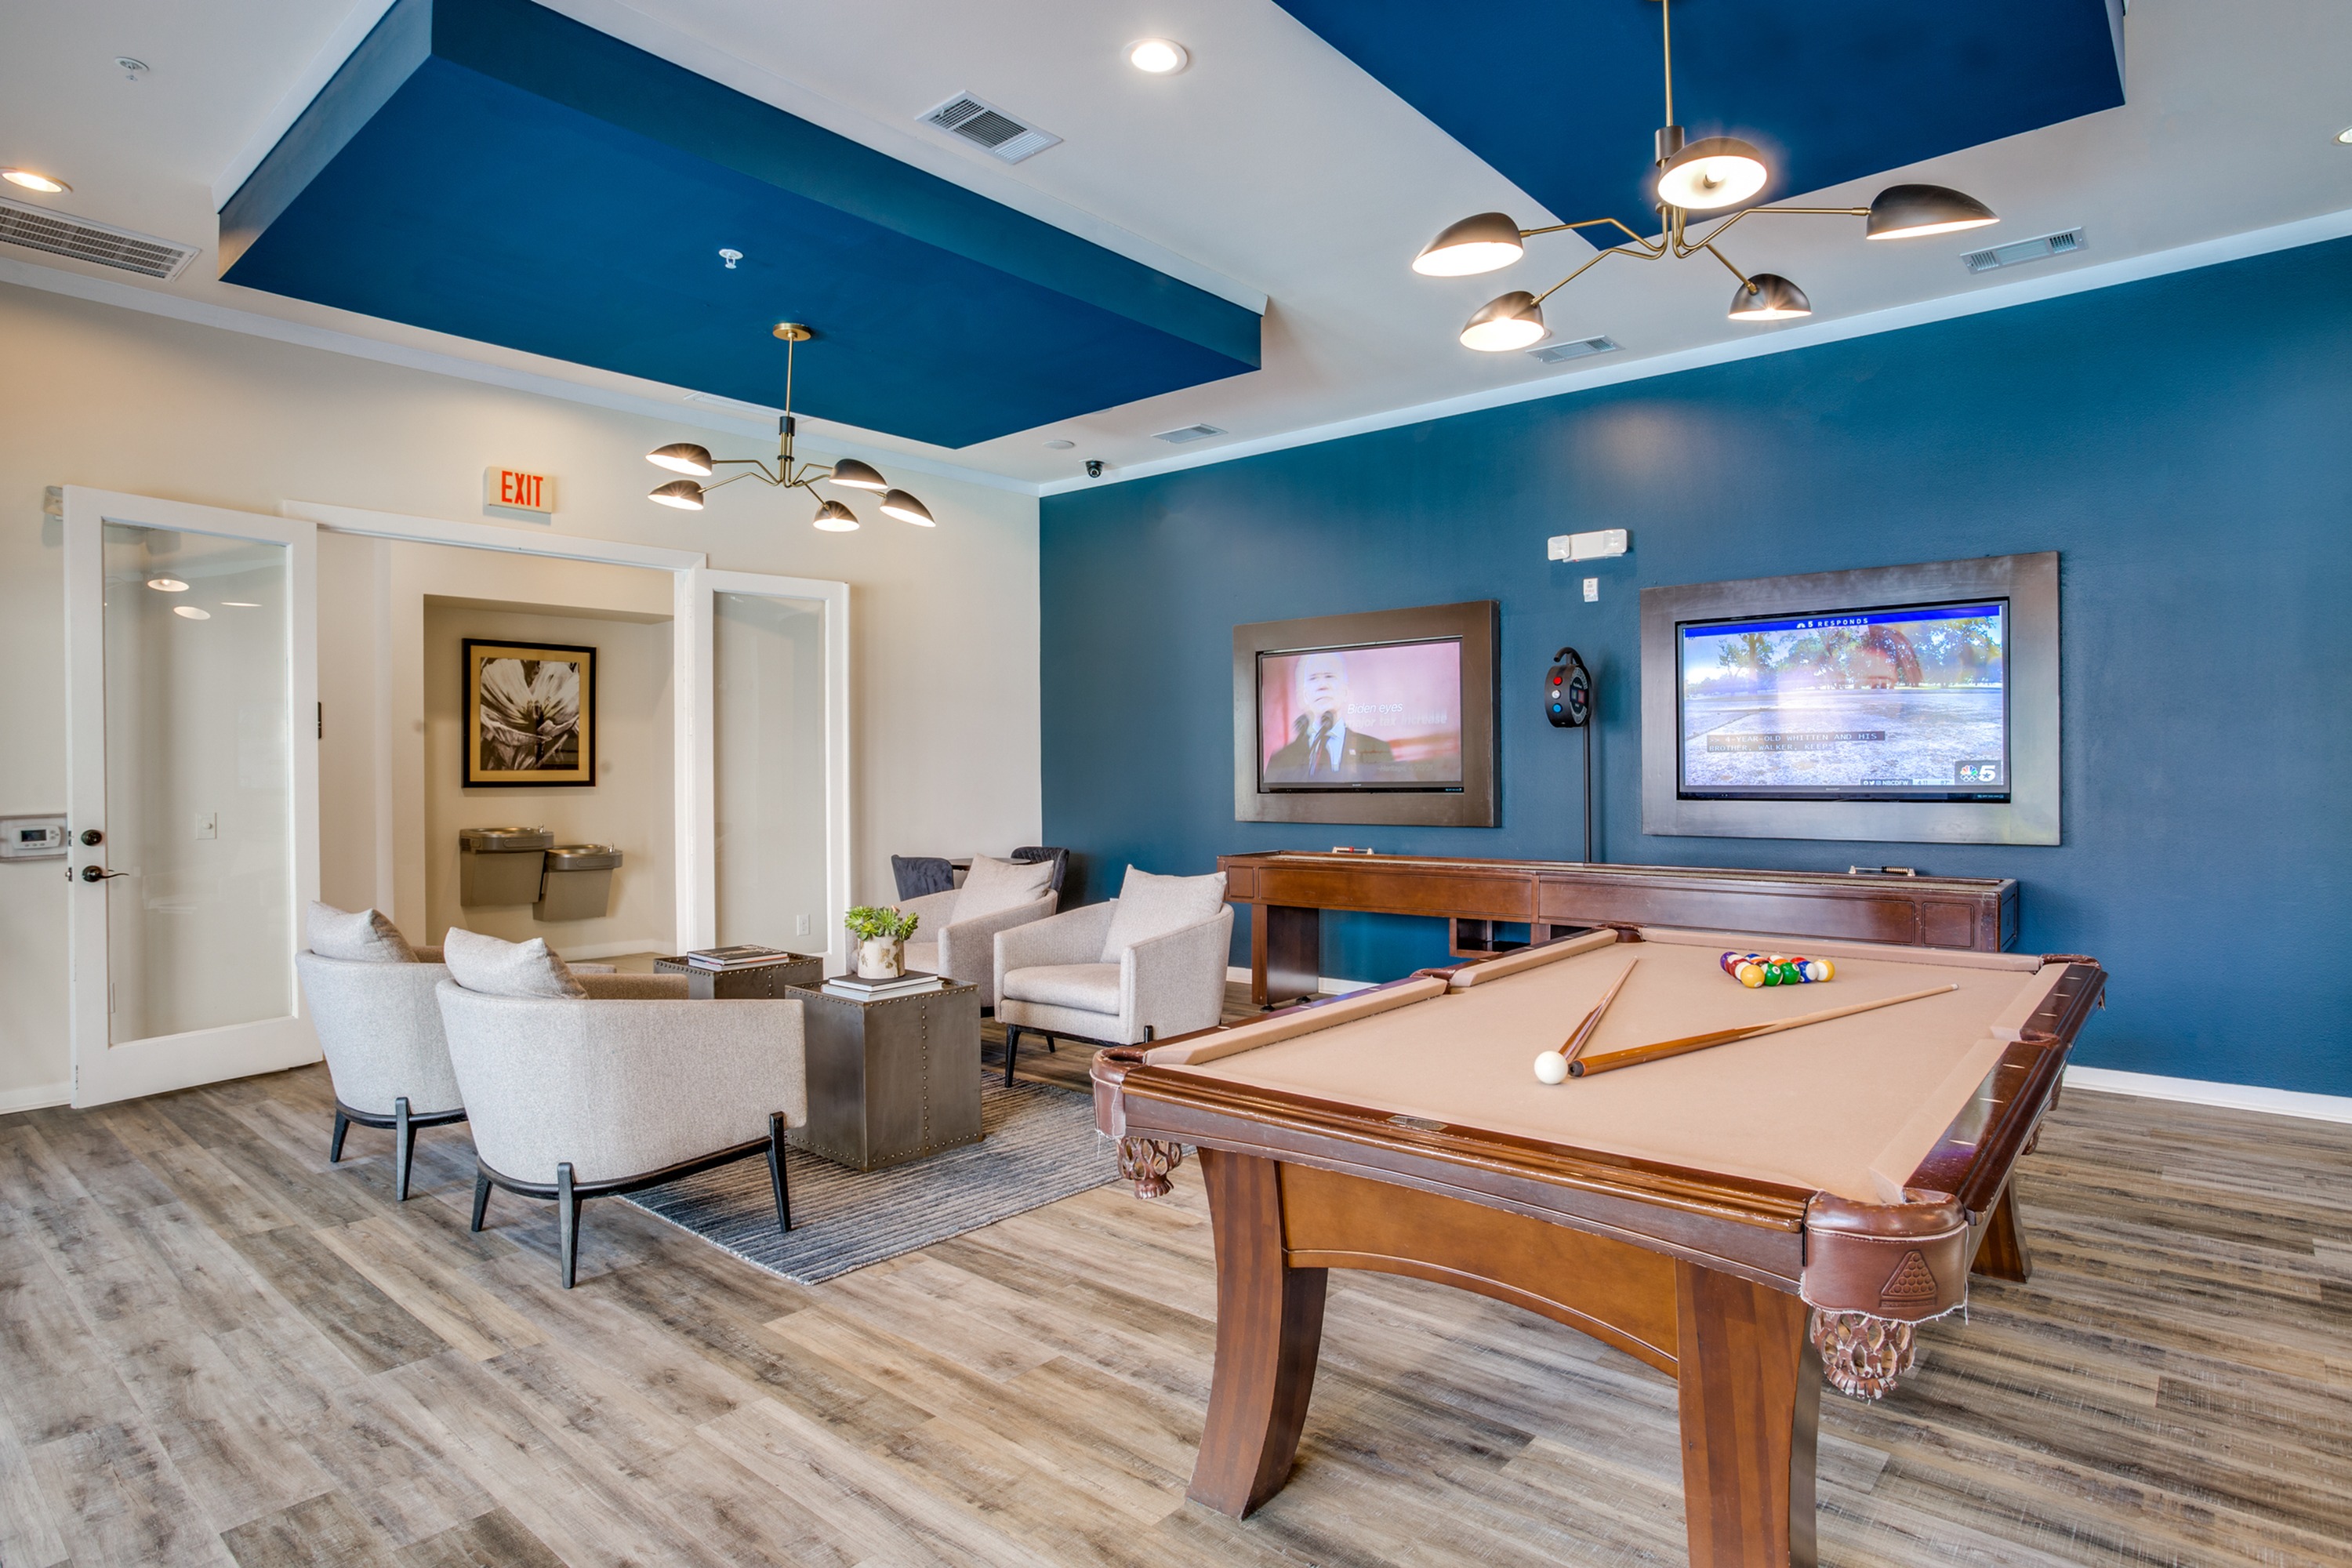 Billiards table in resident lounge with seating area and TV\'s